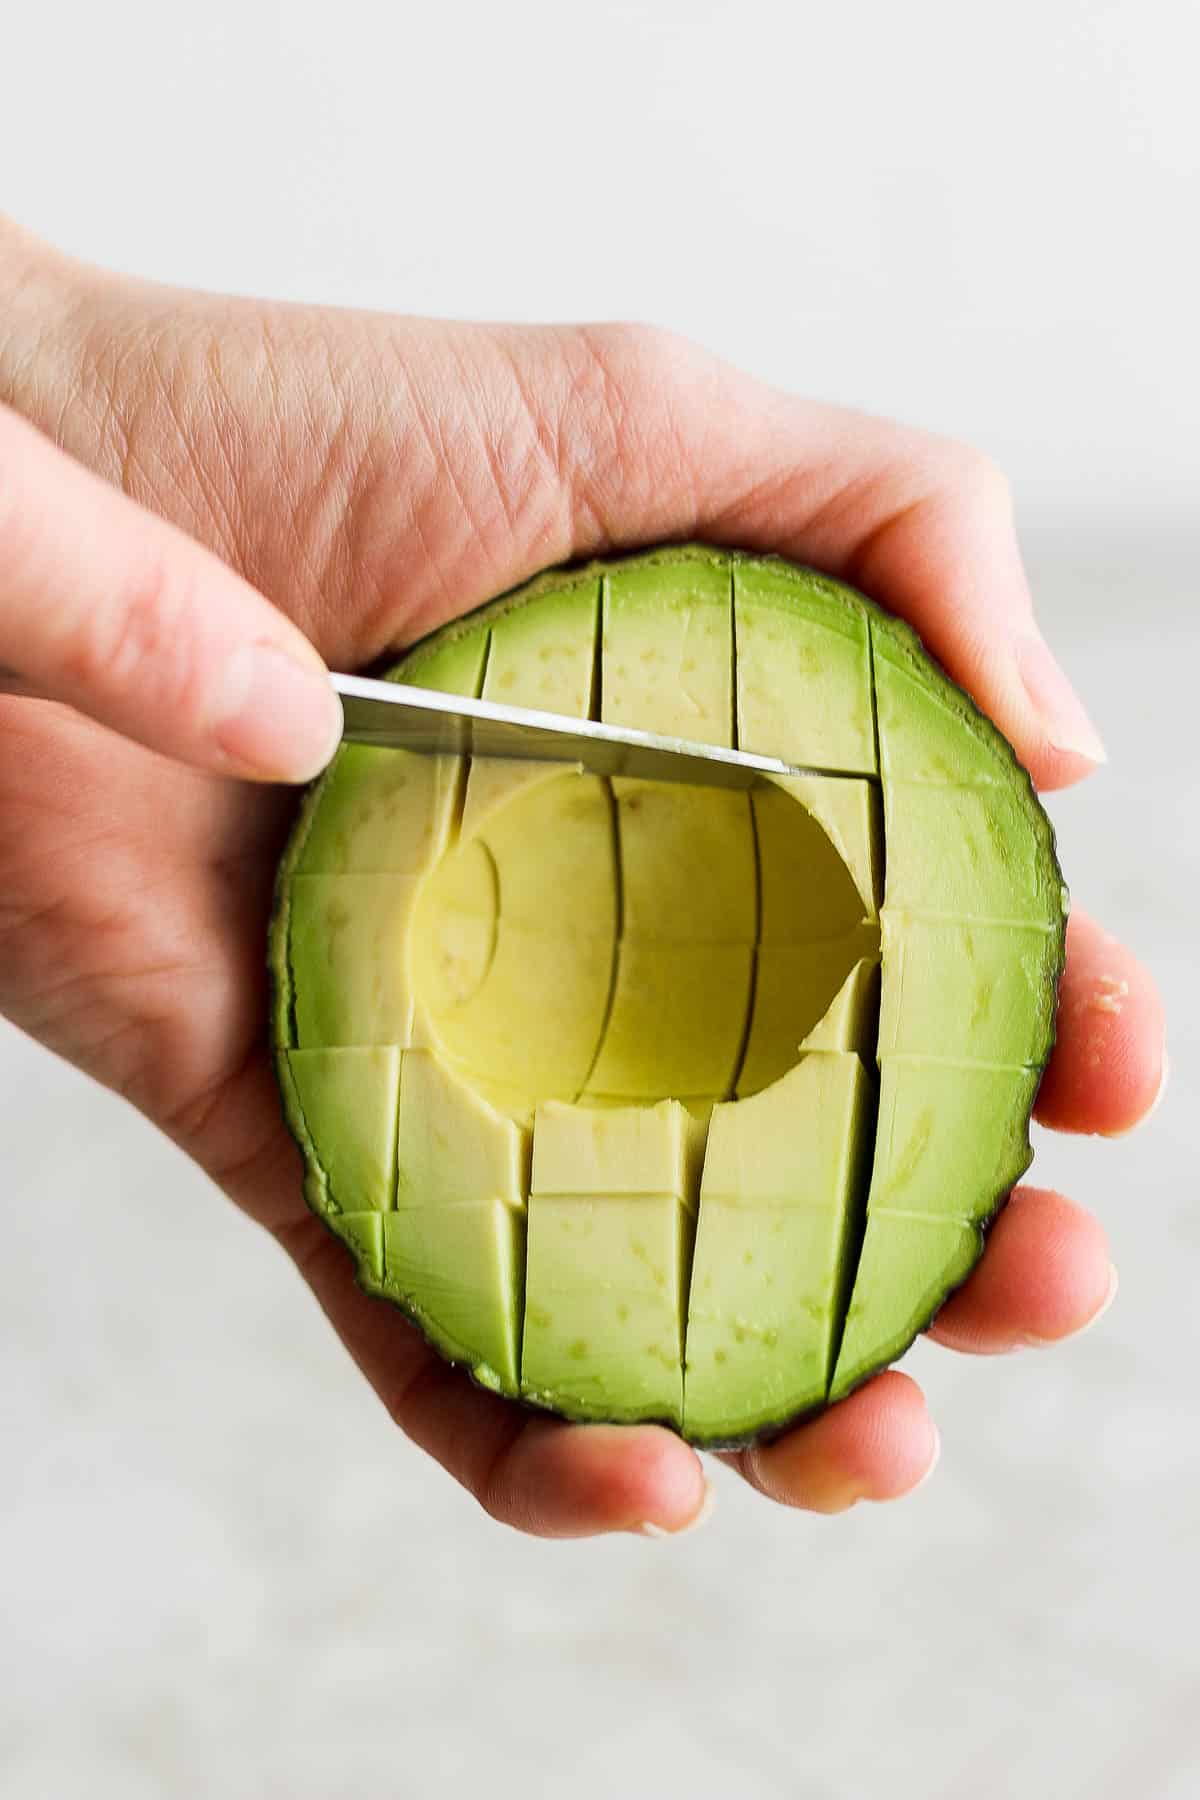 An avocado half that has also been sliced horizontally in order to dice it into pieces.